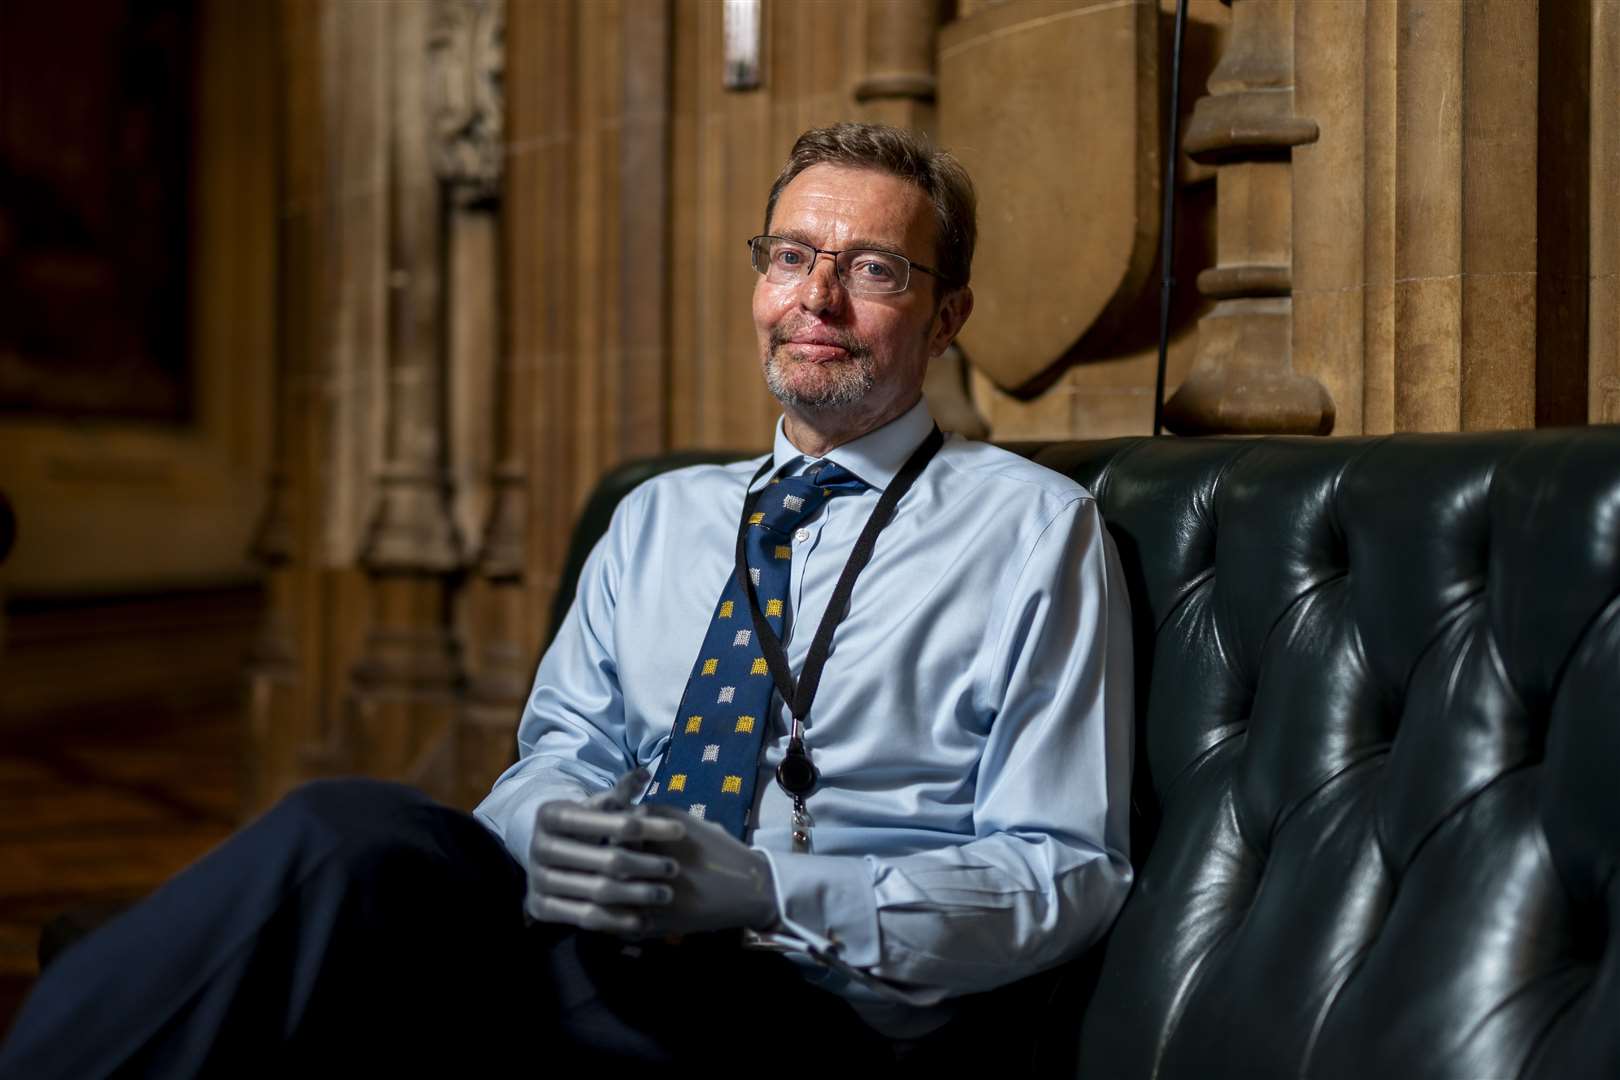 Craig Mackinlay, Conservative MP for South Thanet, poses for a portrait in the Central Lobby of the Palace of Westminster, London (Jordan Pettitt/PA)